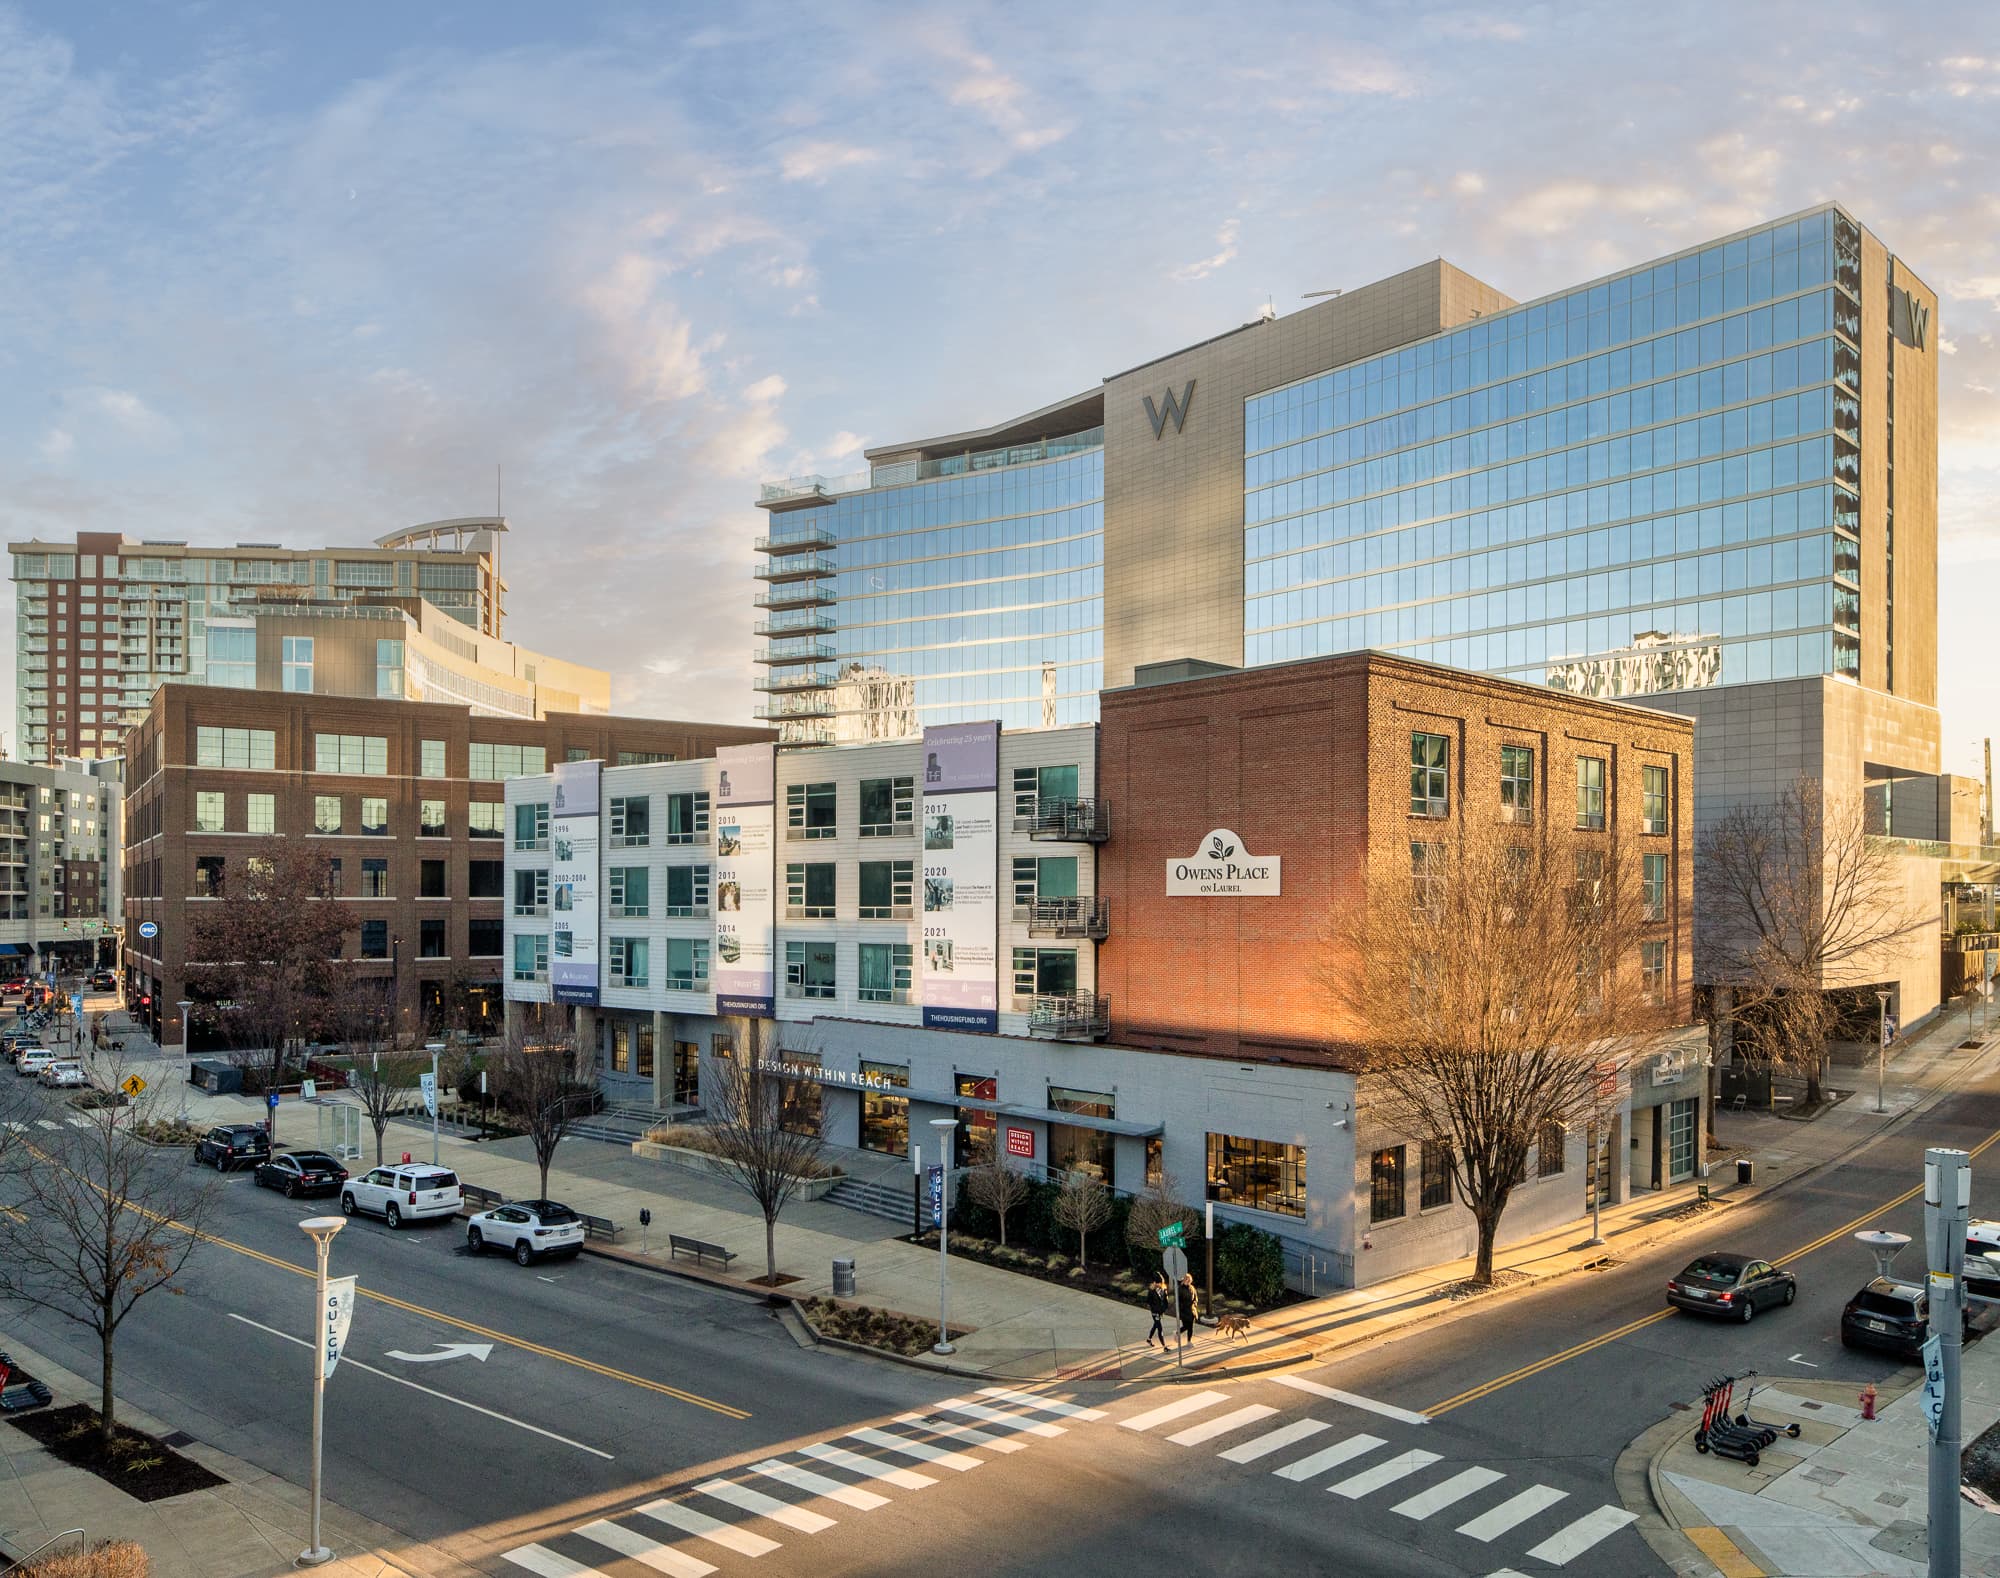 Commercial architectural photography in the Gulch Nashville